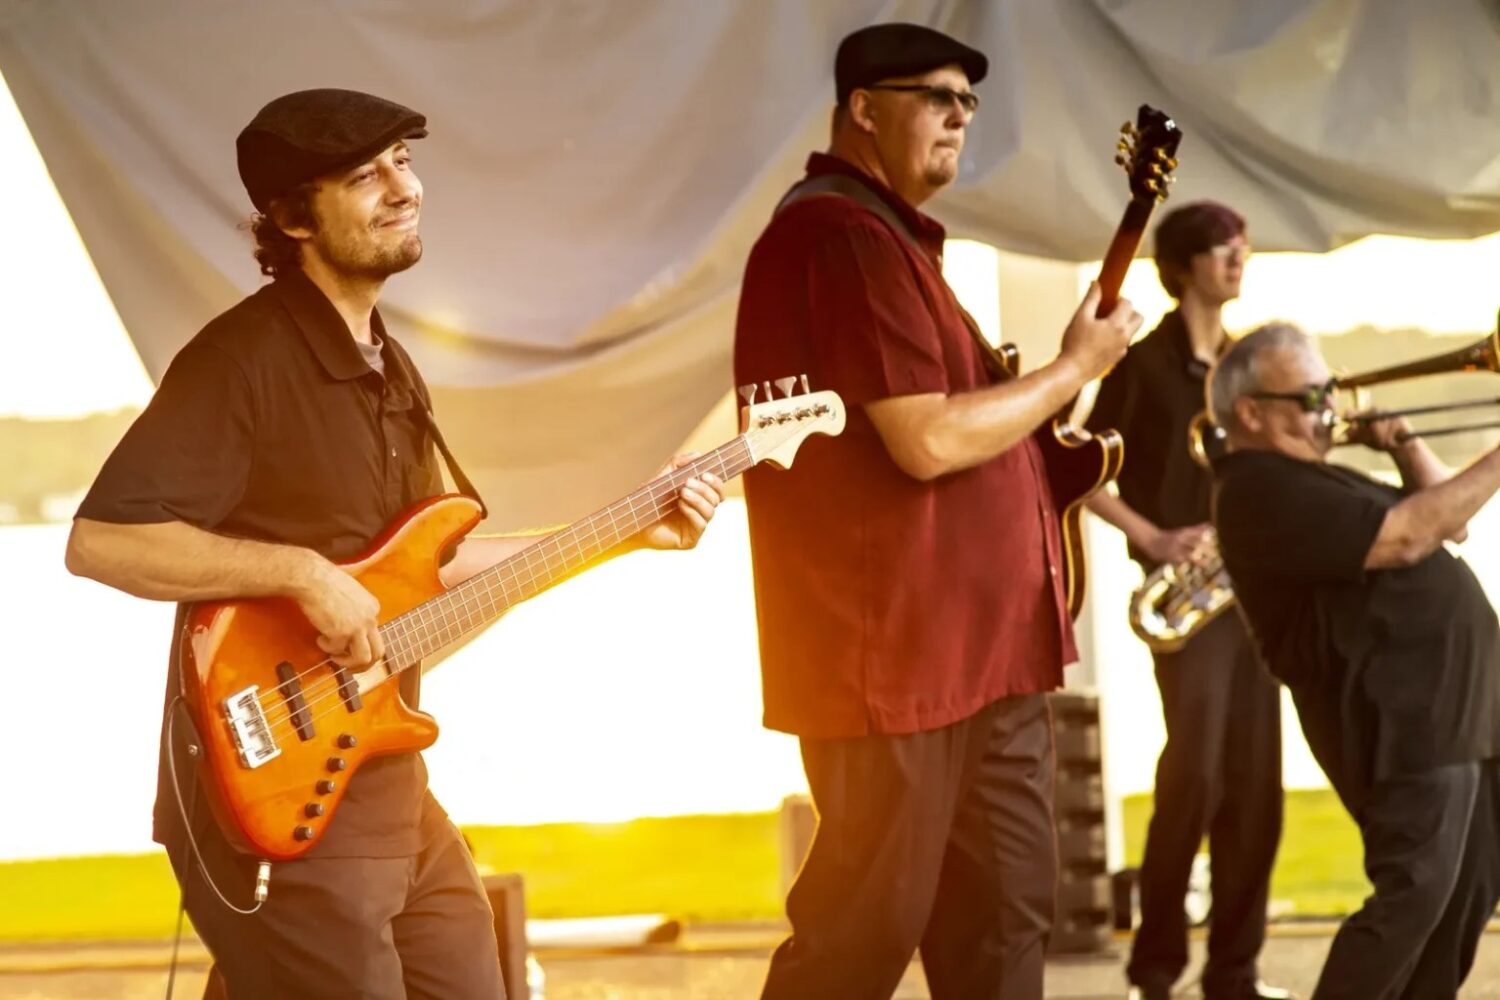 group of four musicians, two with guitars, one with trombone and one with saxophone